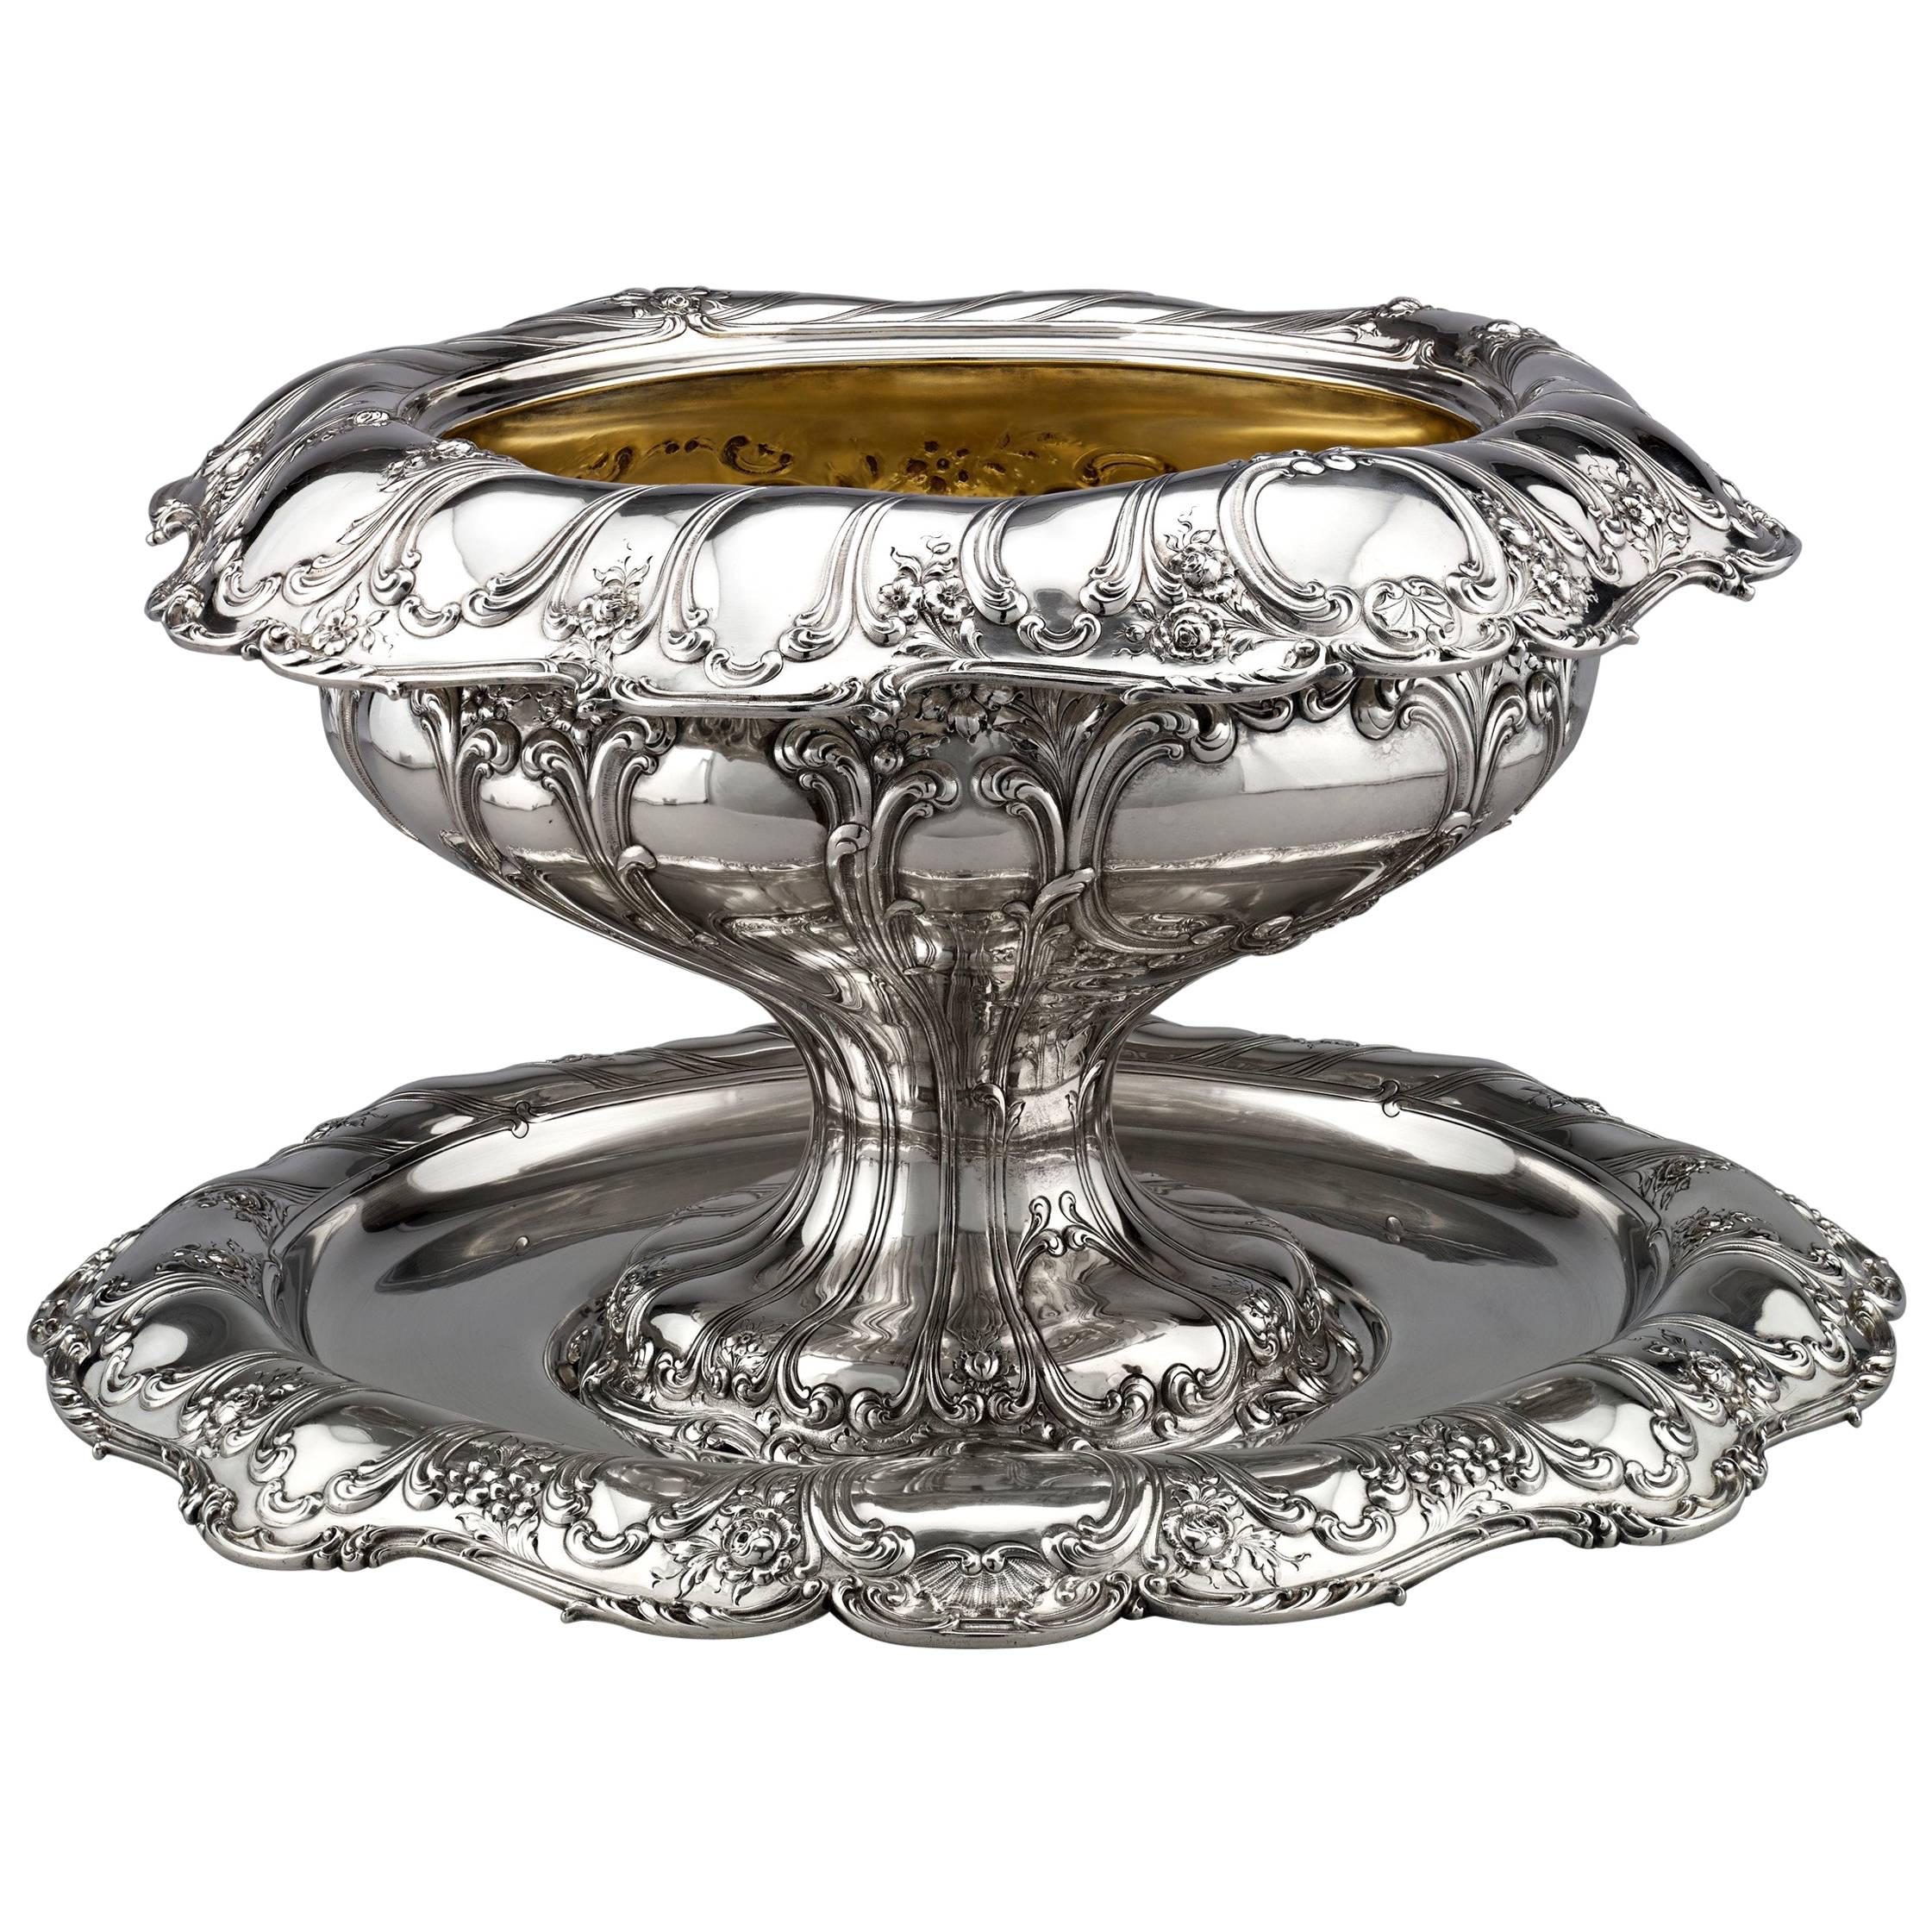 Gorham Silver Punch Bowl and under Plate